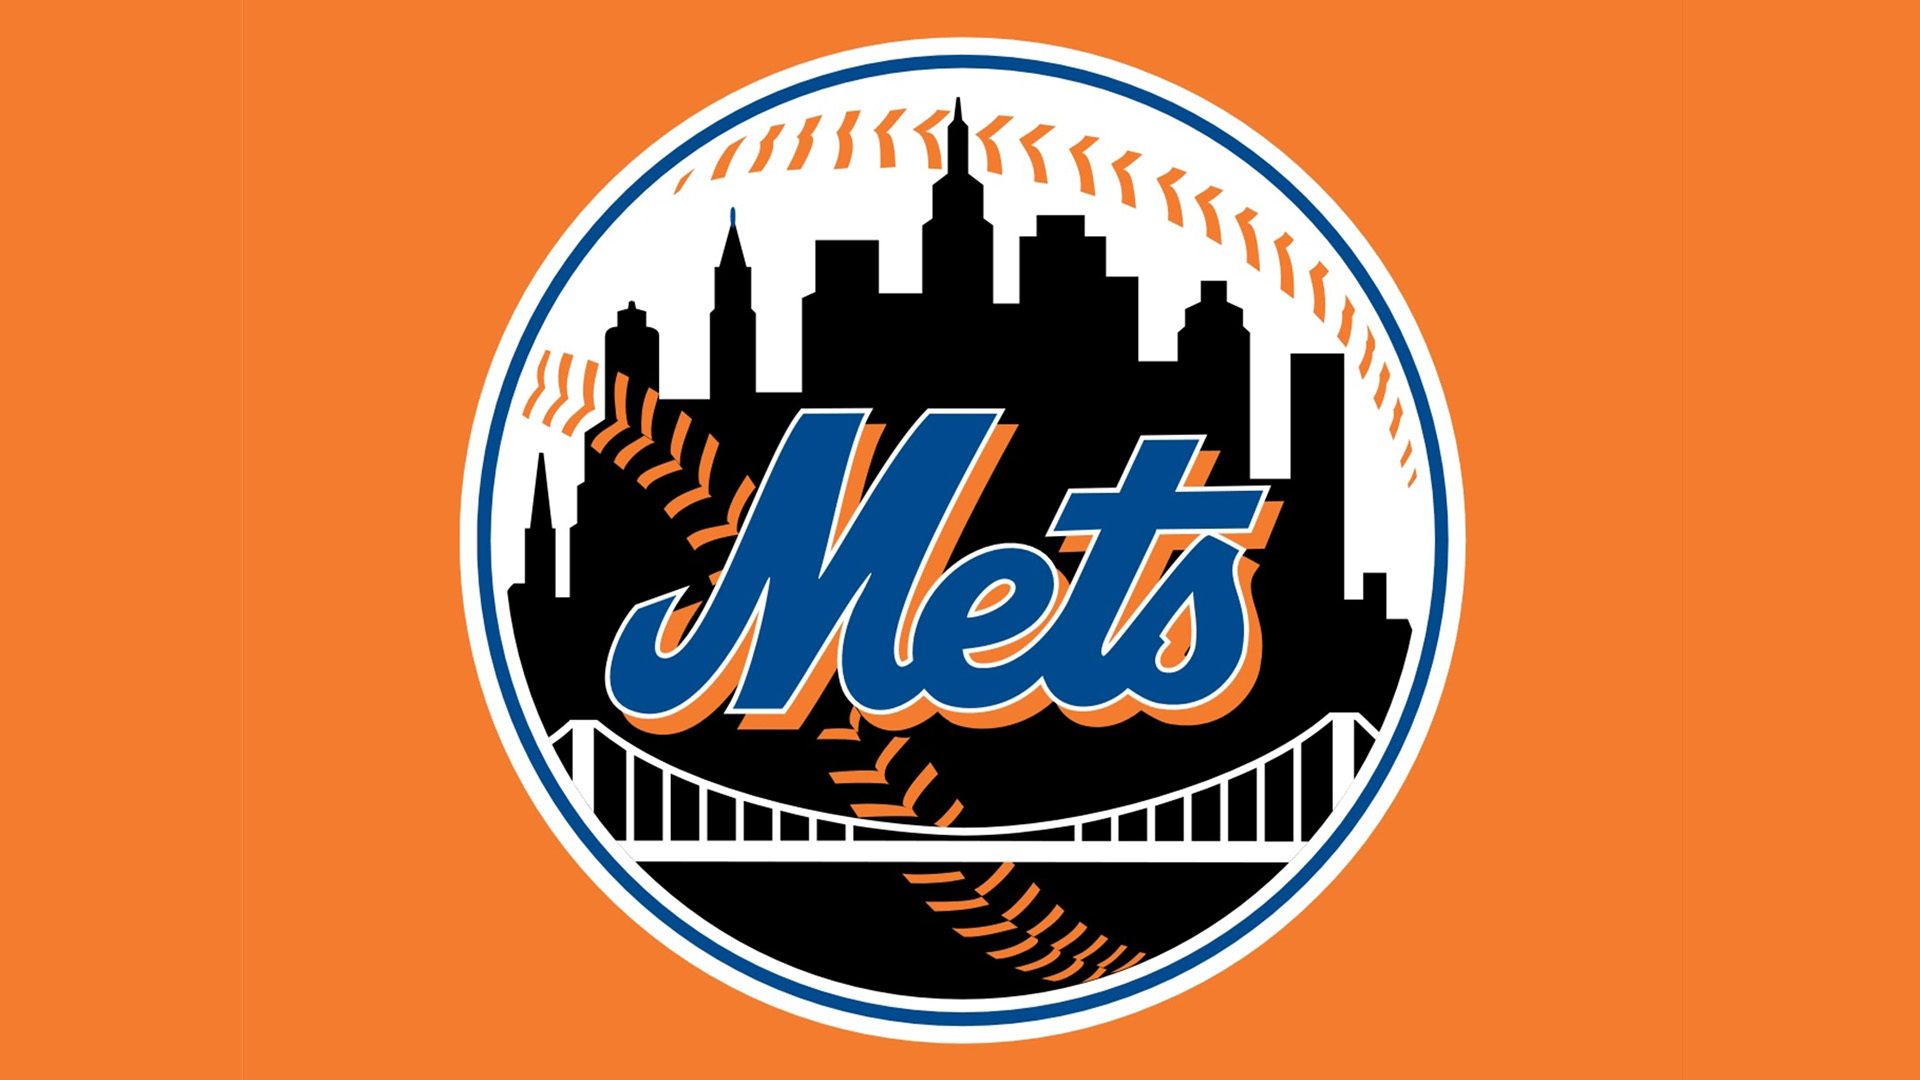 All New York Mets wallpapers.